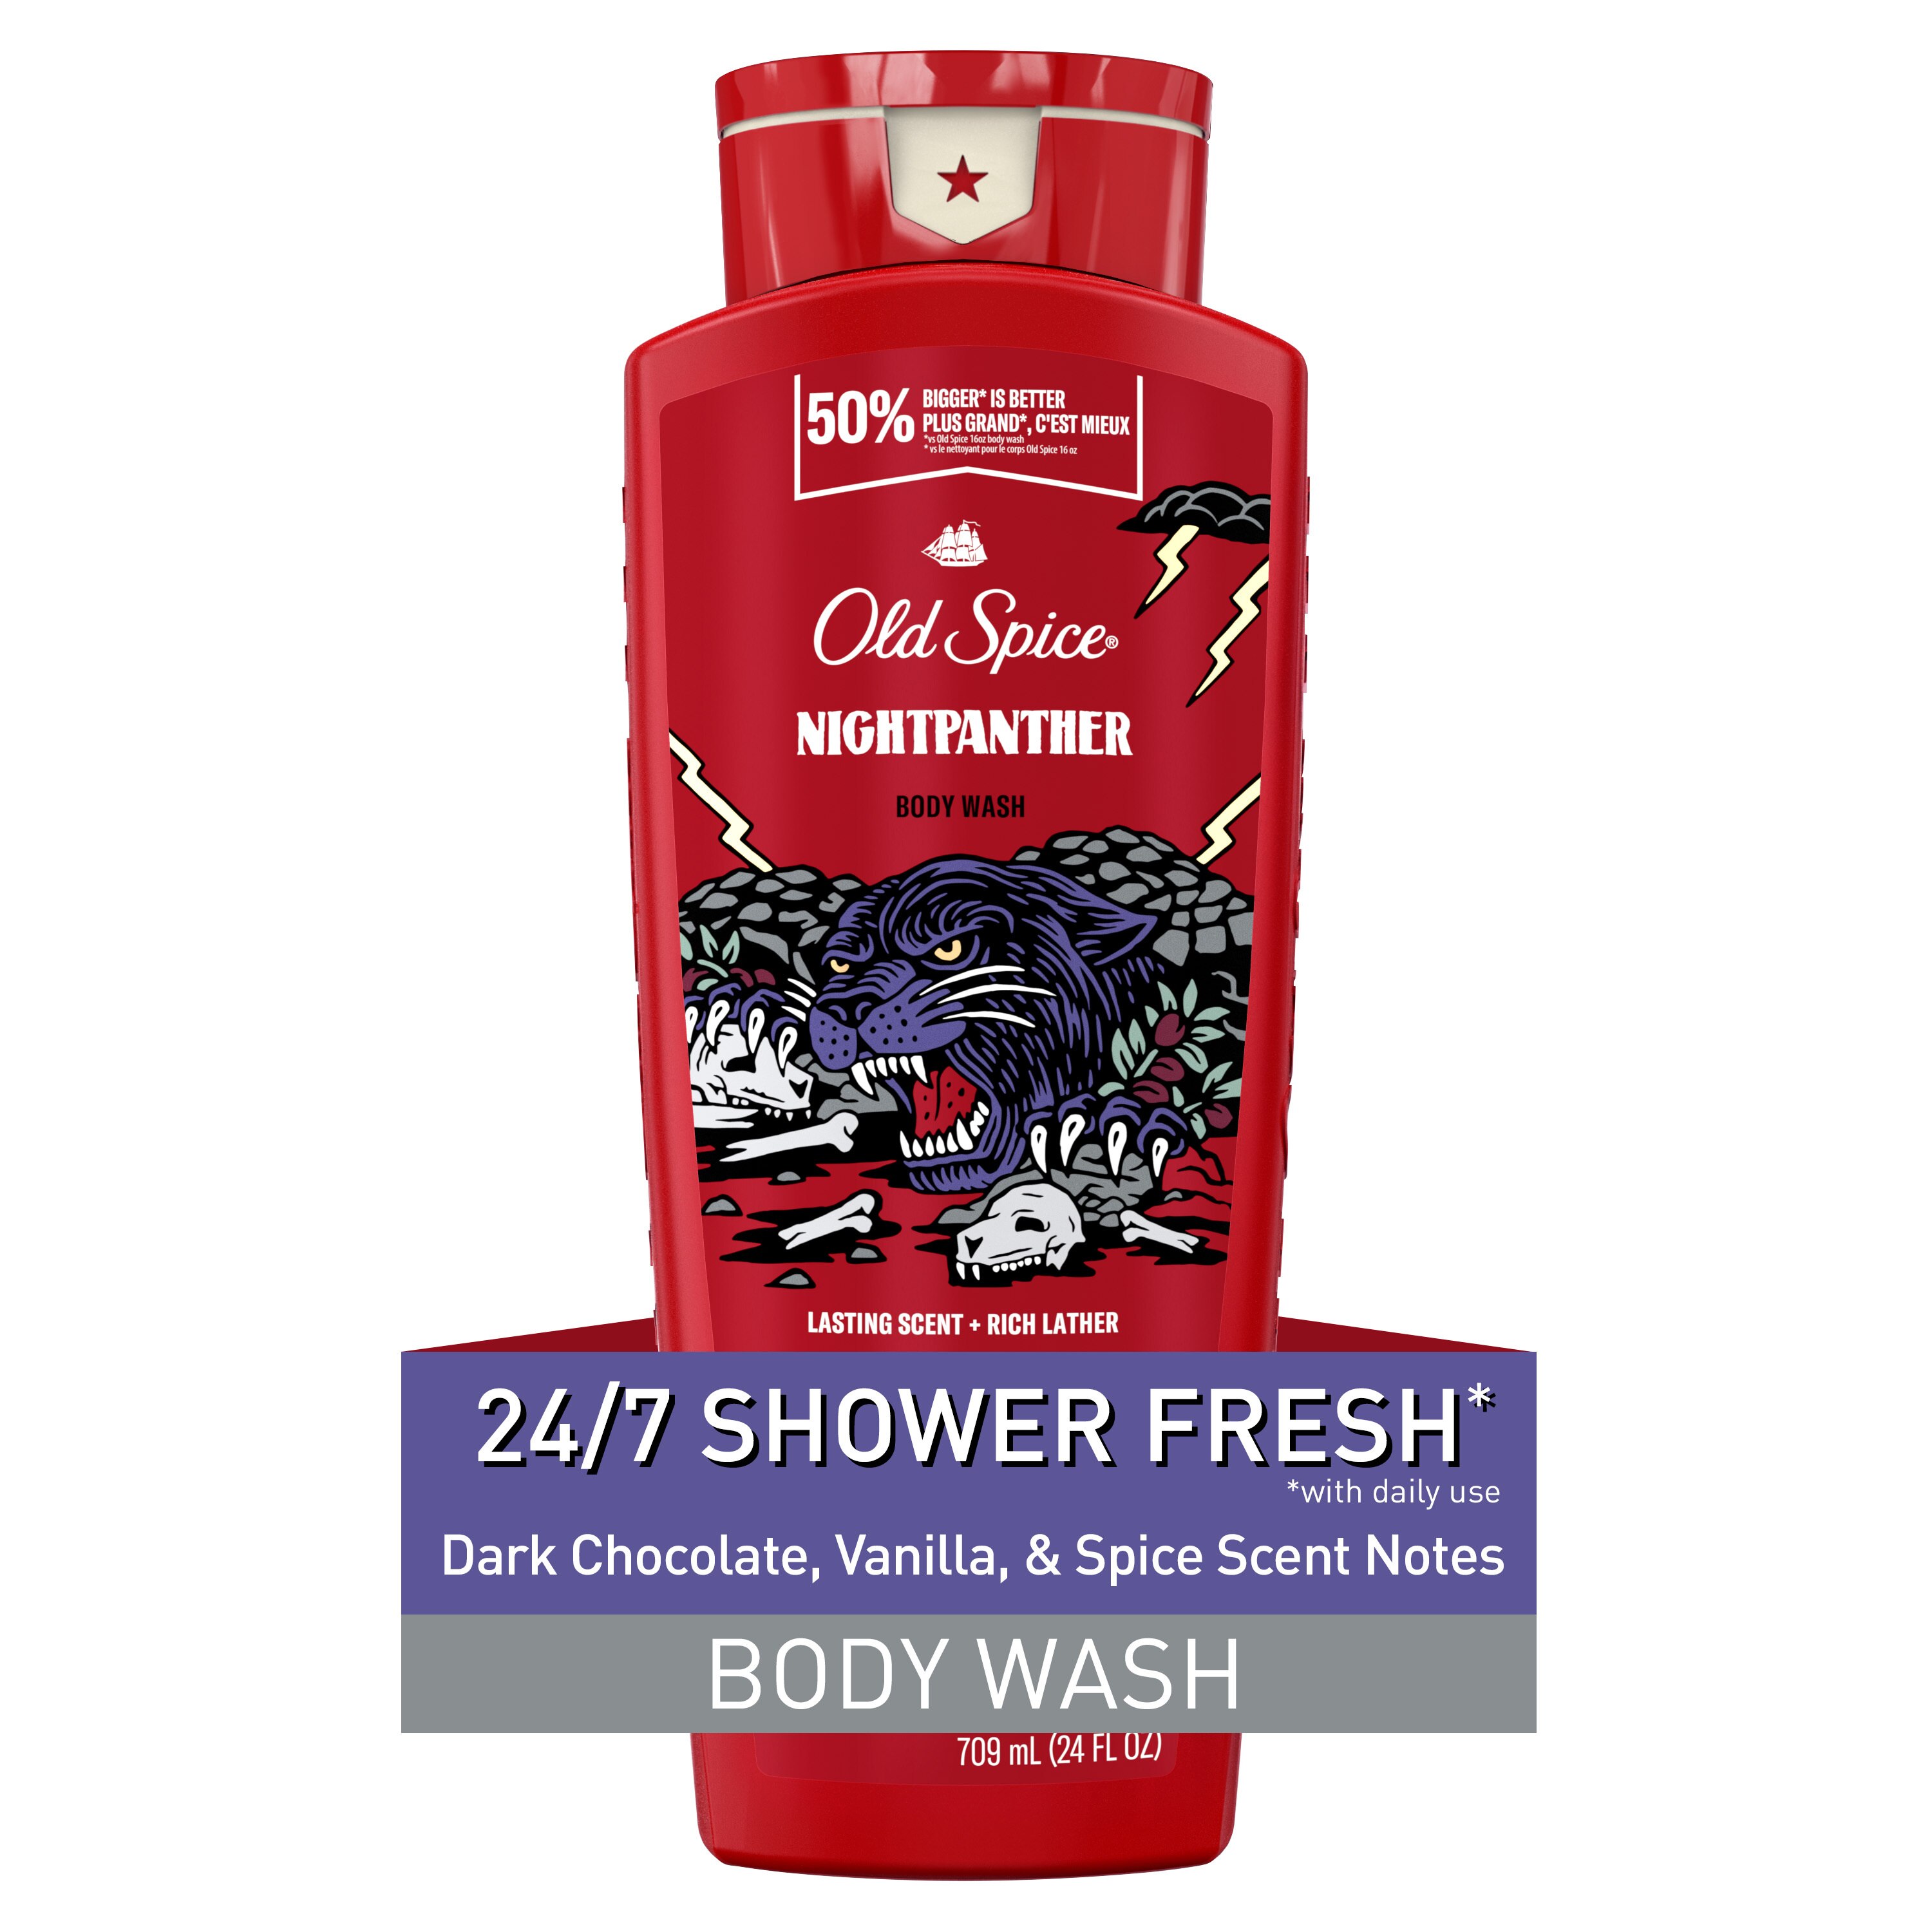 Old Spice Body Wash for Men, NightPanther, 24 oz